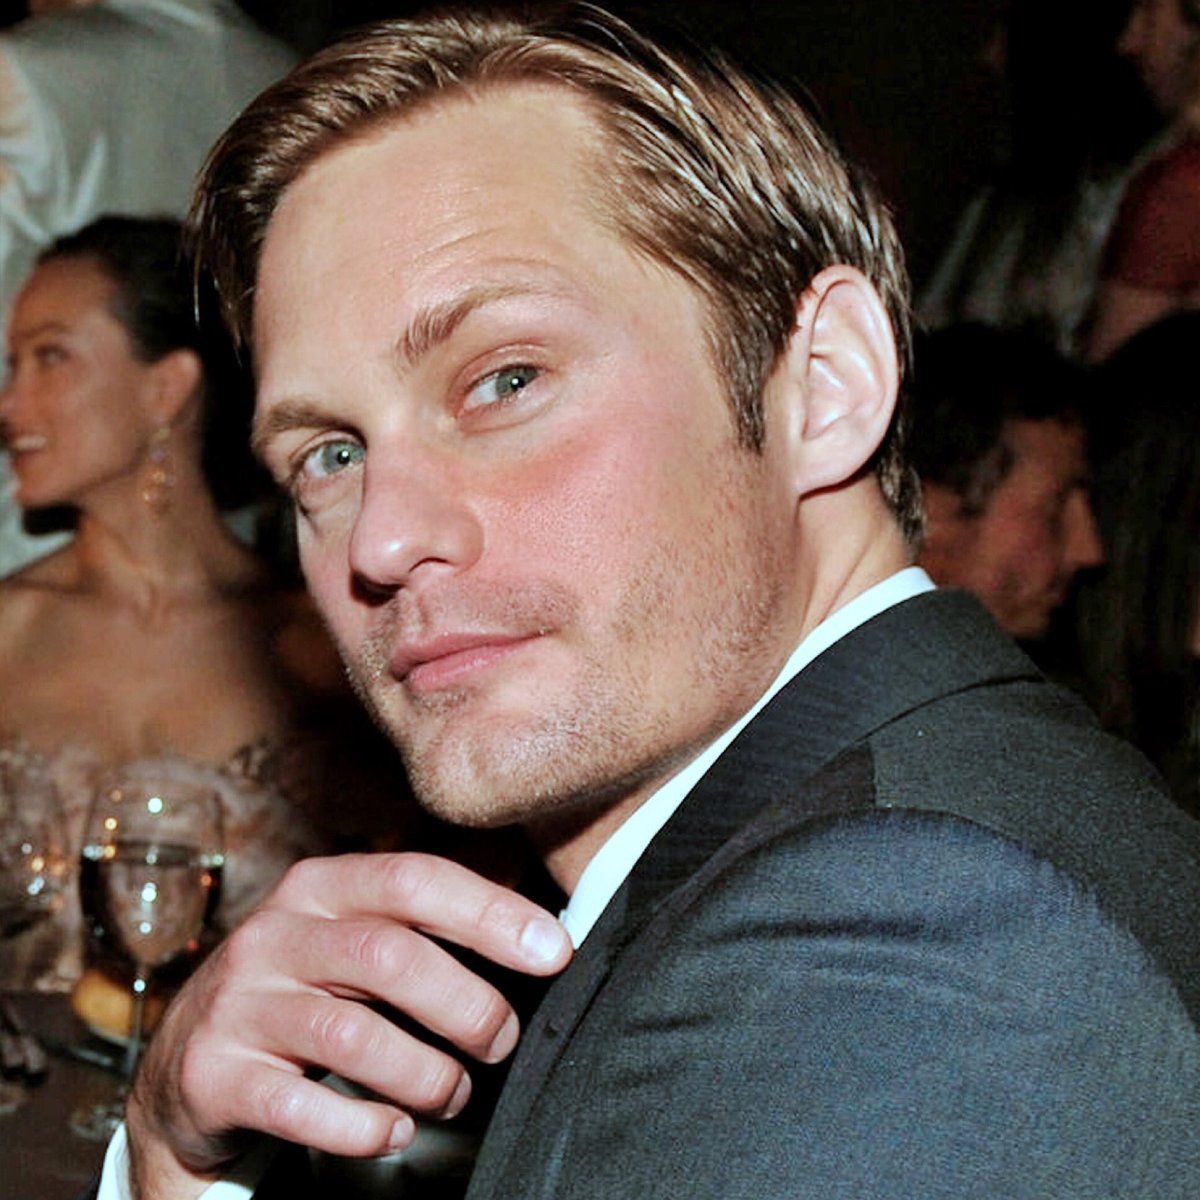 😍😍 Happy Sunday! 12 years ago #OTD 
📸 Getty, BEVERLY HILLS, CA - JANUARY 16: Actor Alexander Skarsgard attends The Art of Elysium's 3rd Annual Black Tie Charity Gala 